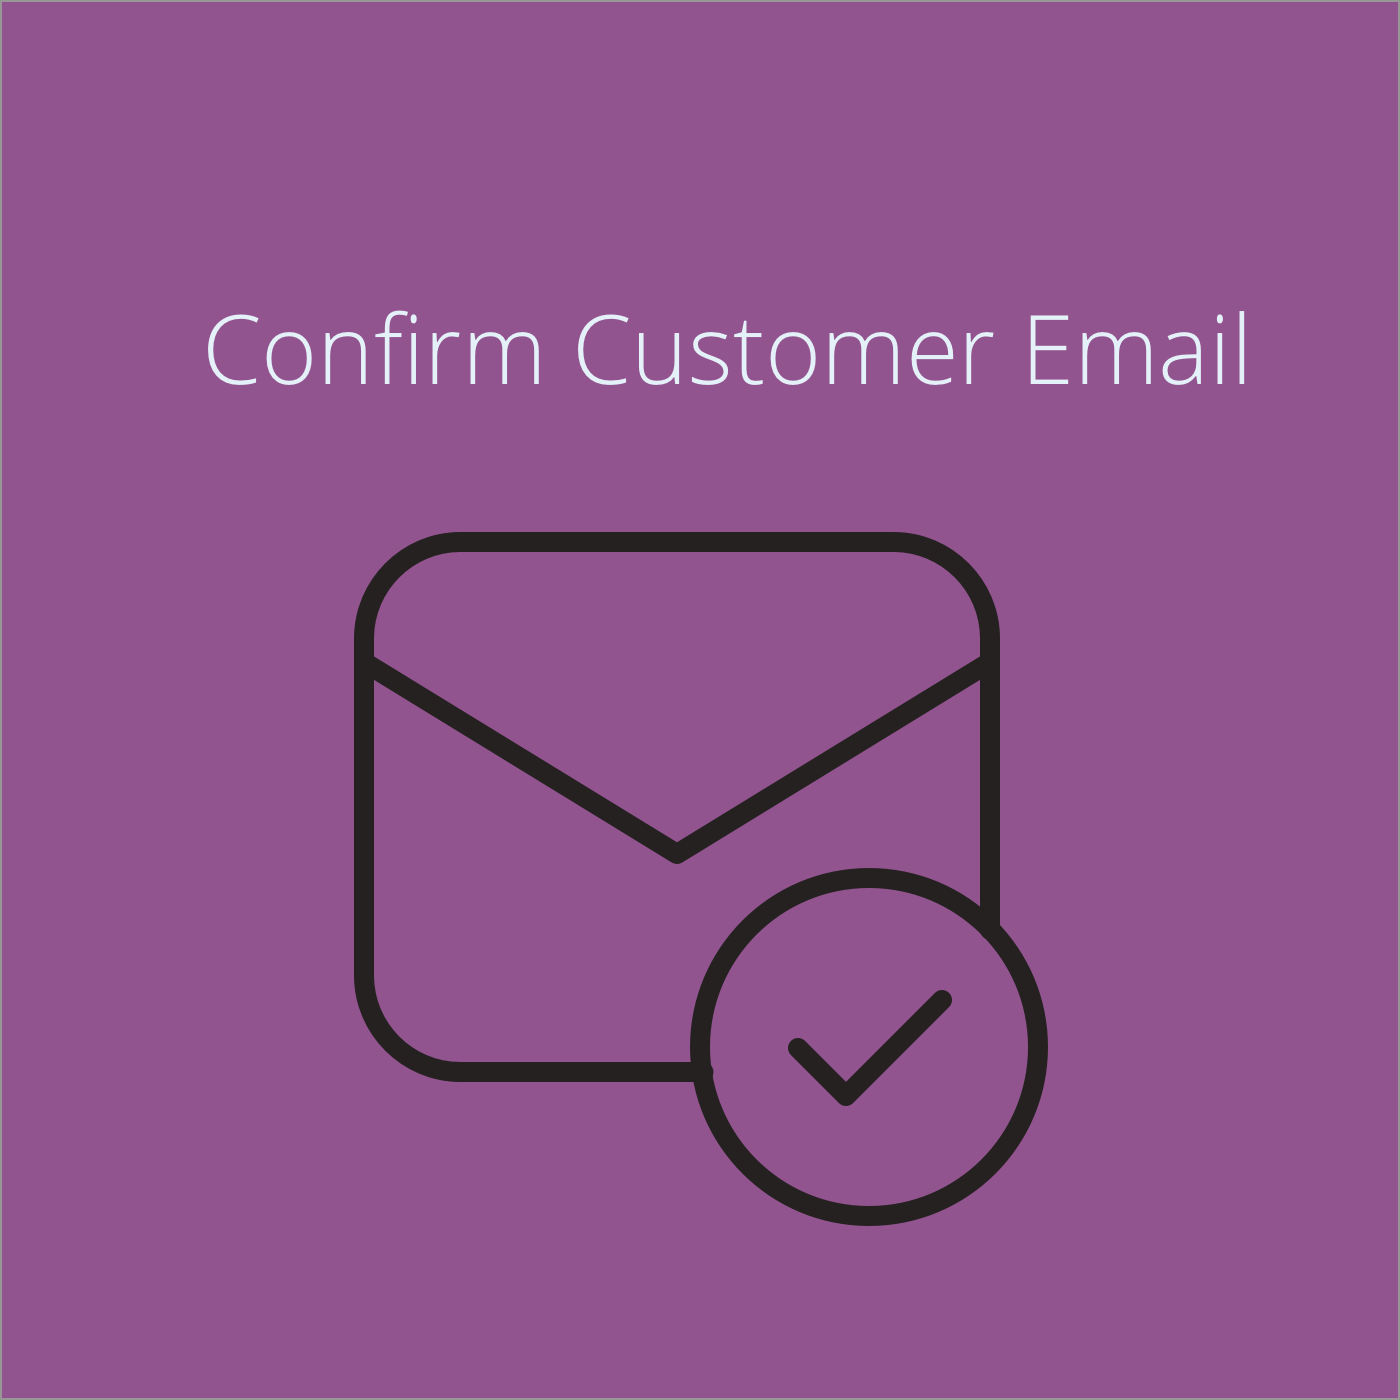 Confirm Customer Email for Magento 2